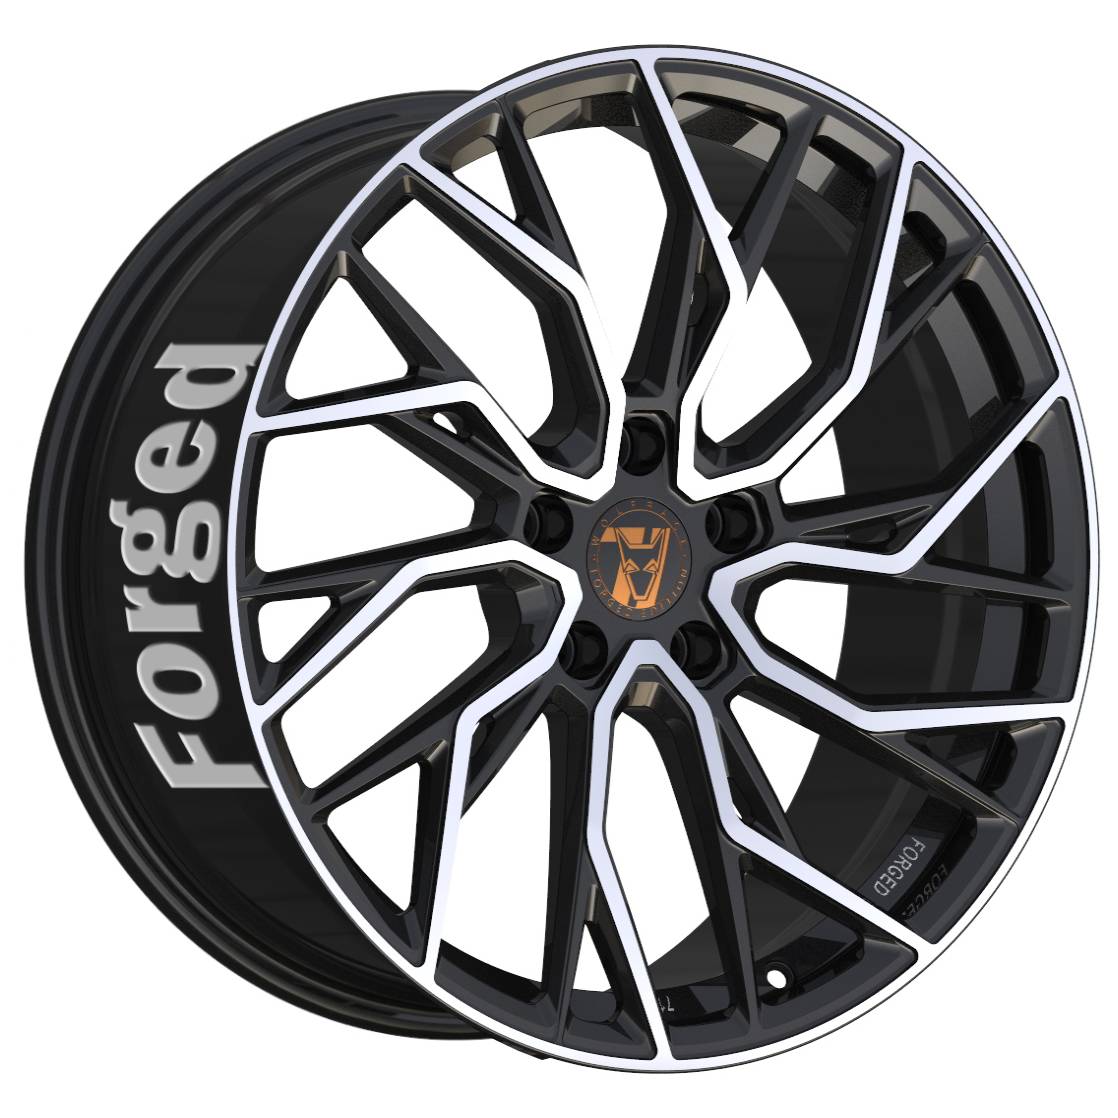 Demon Wheels 71 Forged Edition Voodoo Forged [13x24] -5x130- ET 35